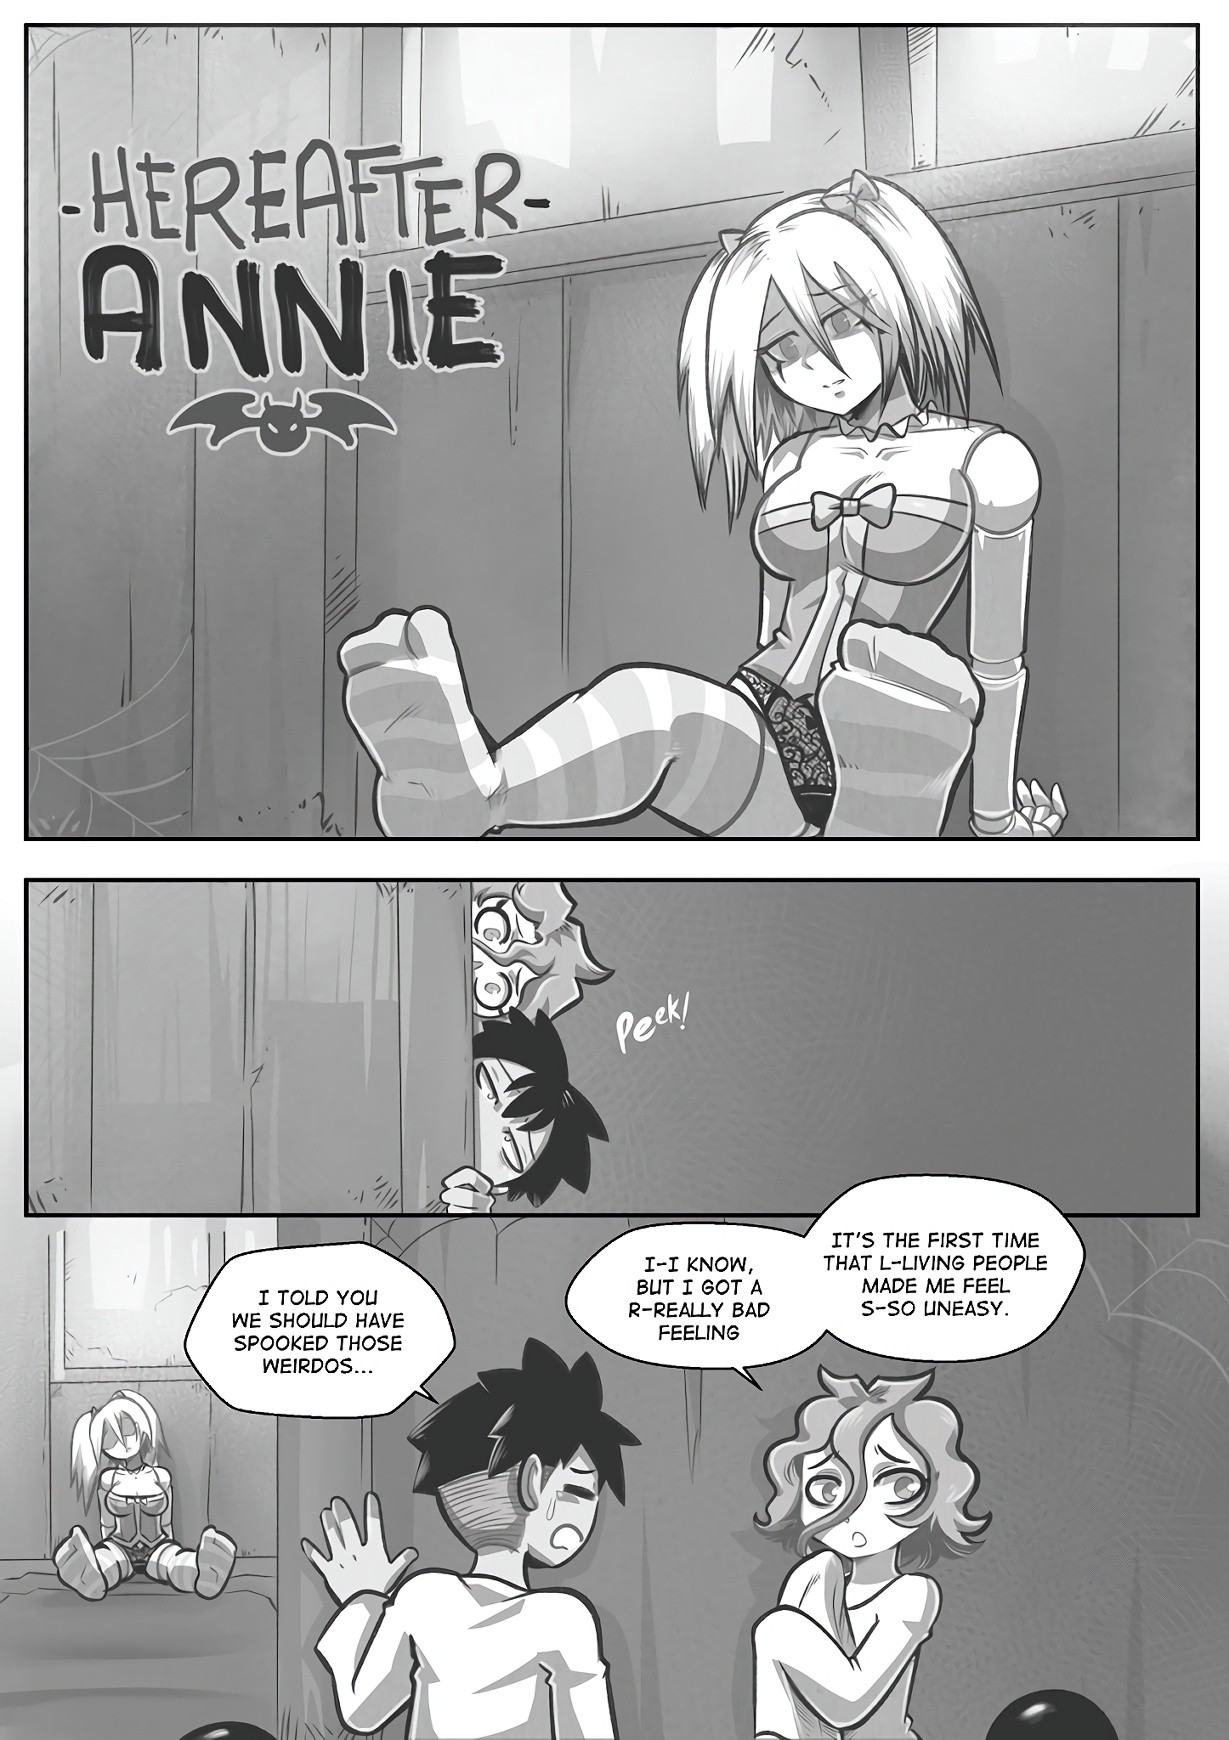 Tales from the Annieverse - Hereafter Annie porn comic picture 2